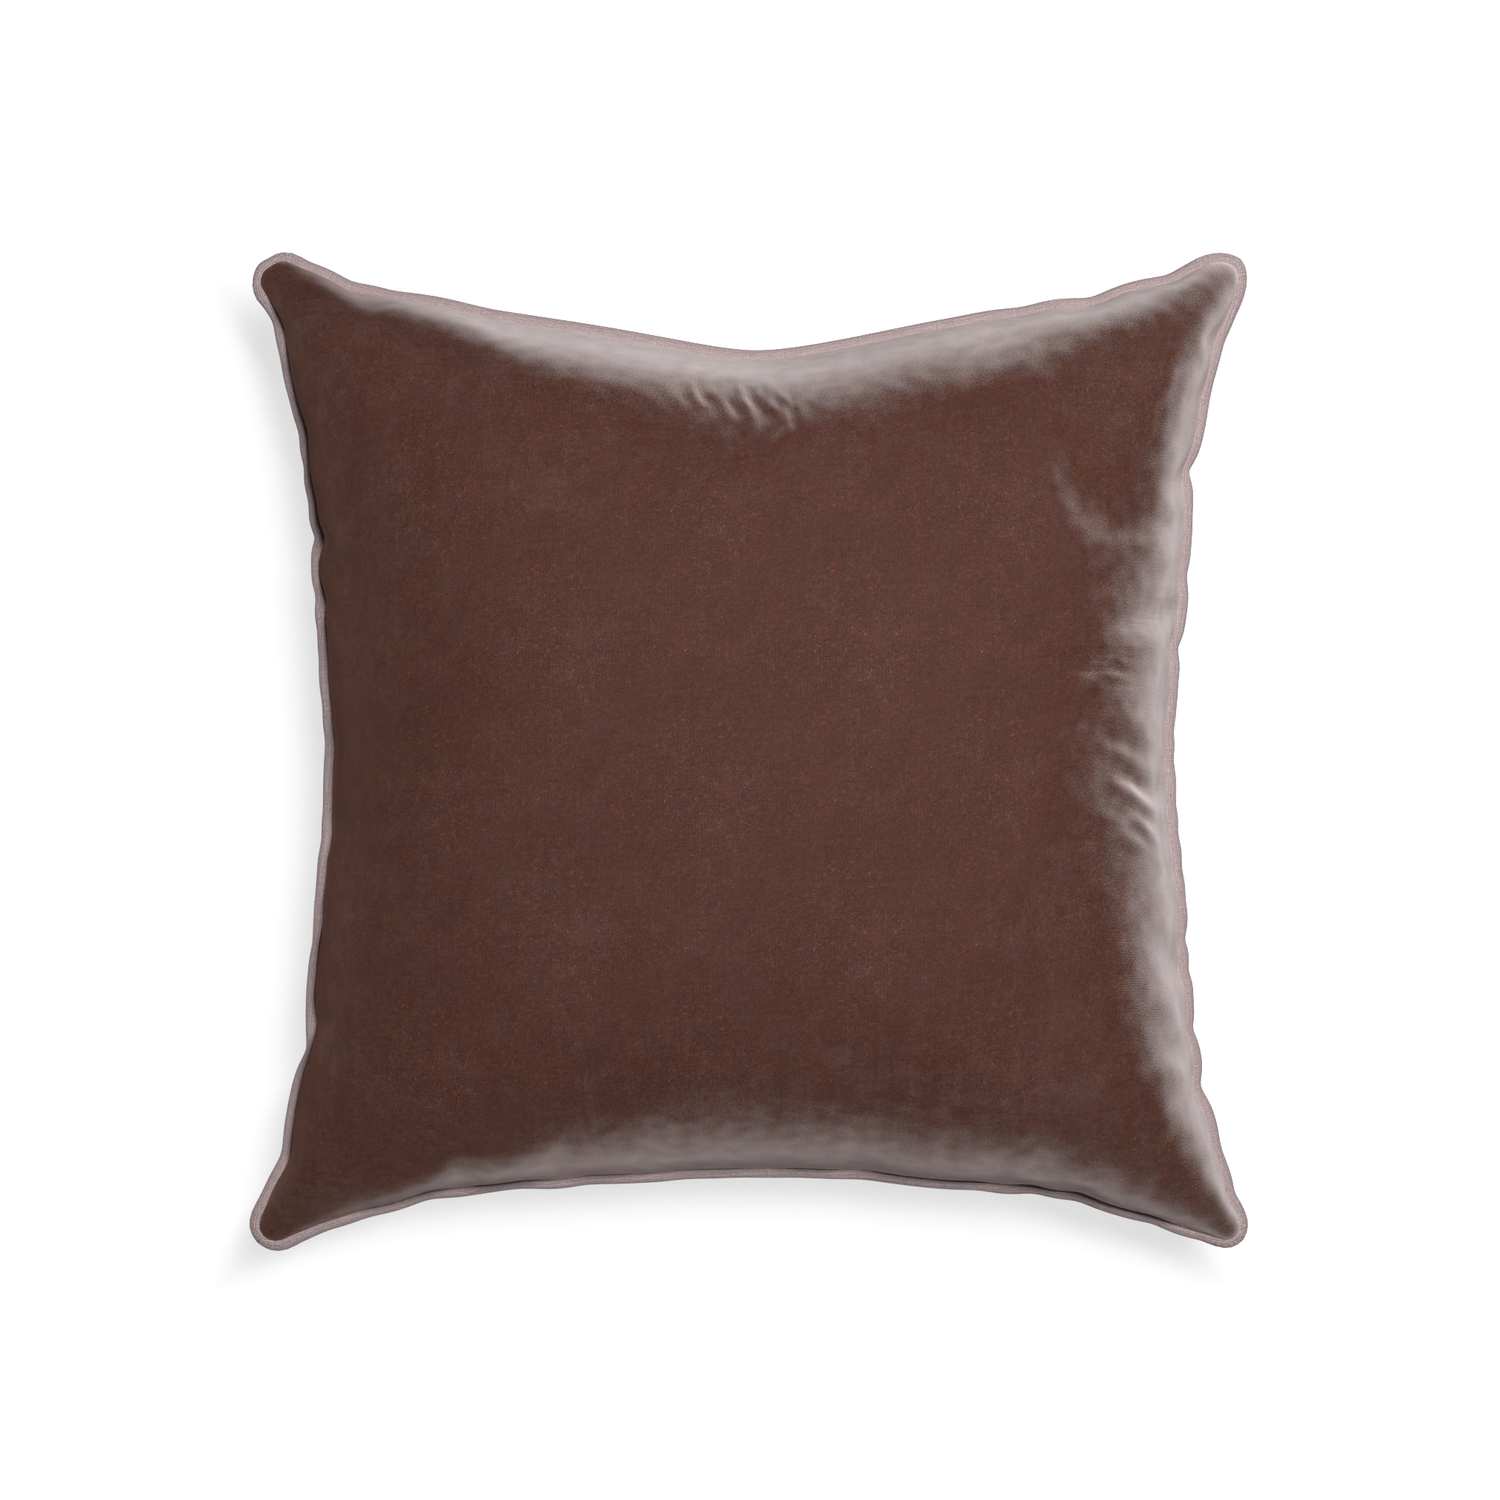 22-square walnut velvet custom brownpillow with orchid piping on white background